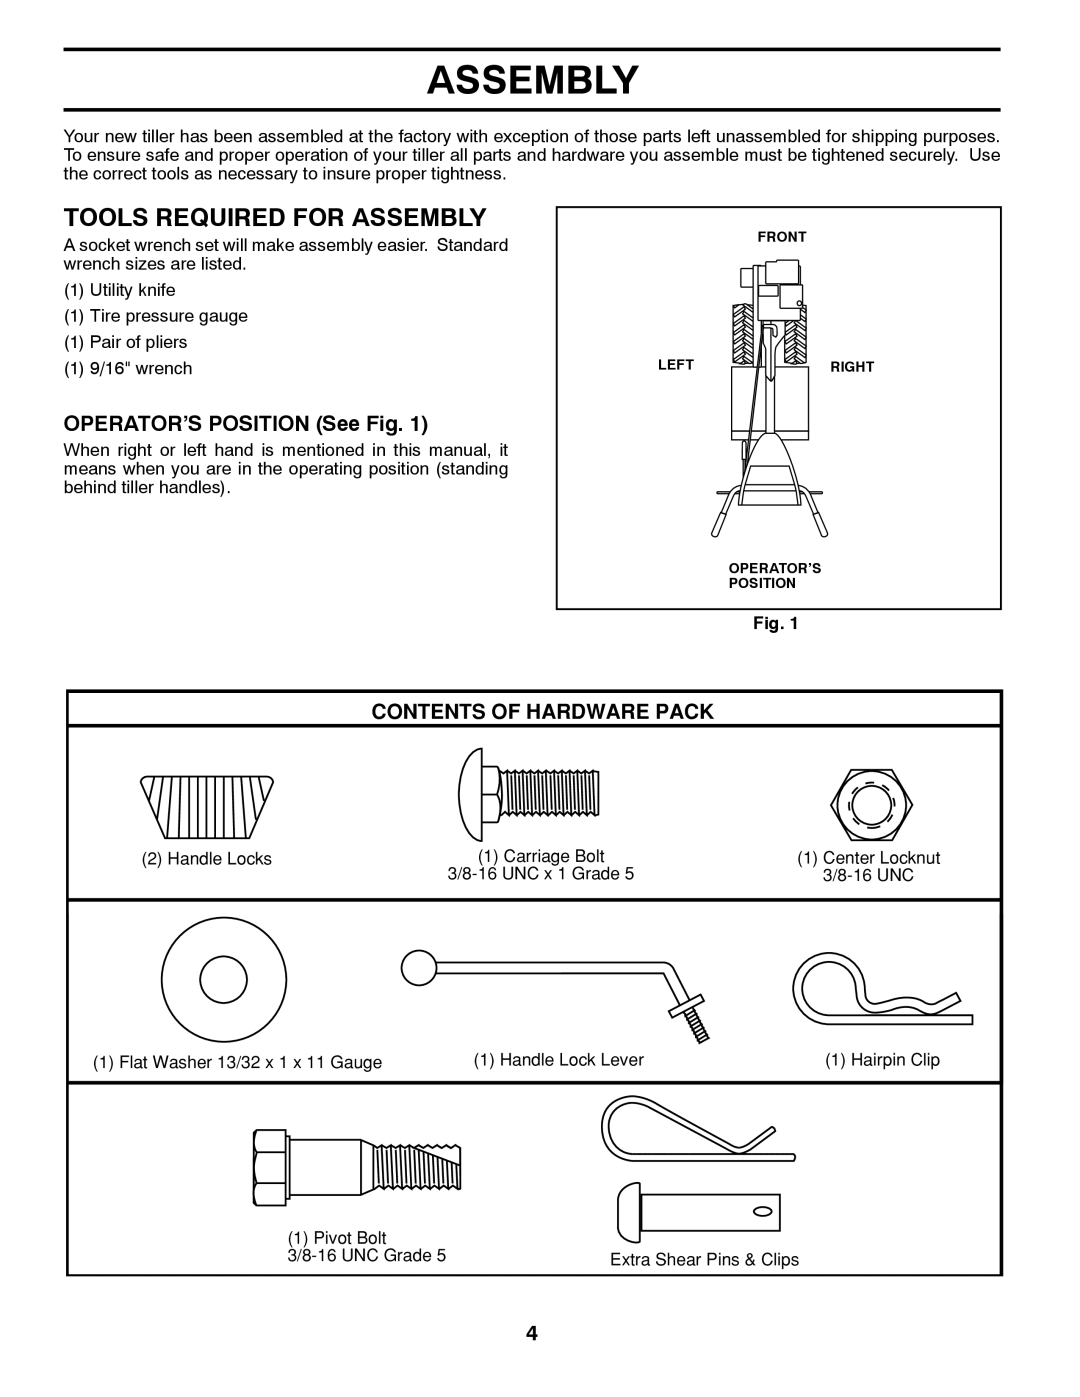 Husqvarna DRT 900 owner manual Tools Required For Assembly, OPERATOR’S POSITION See Fig, Contents Of Hardware Pack 